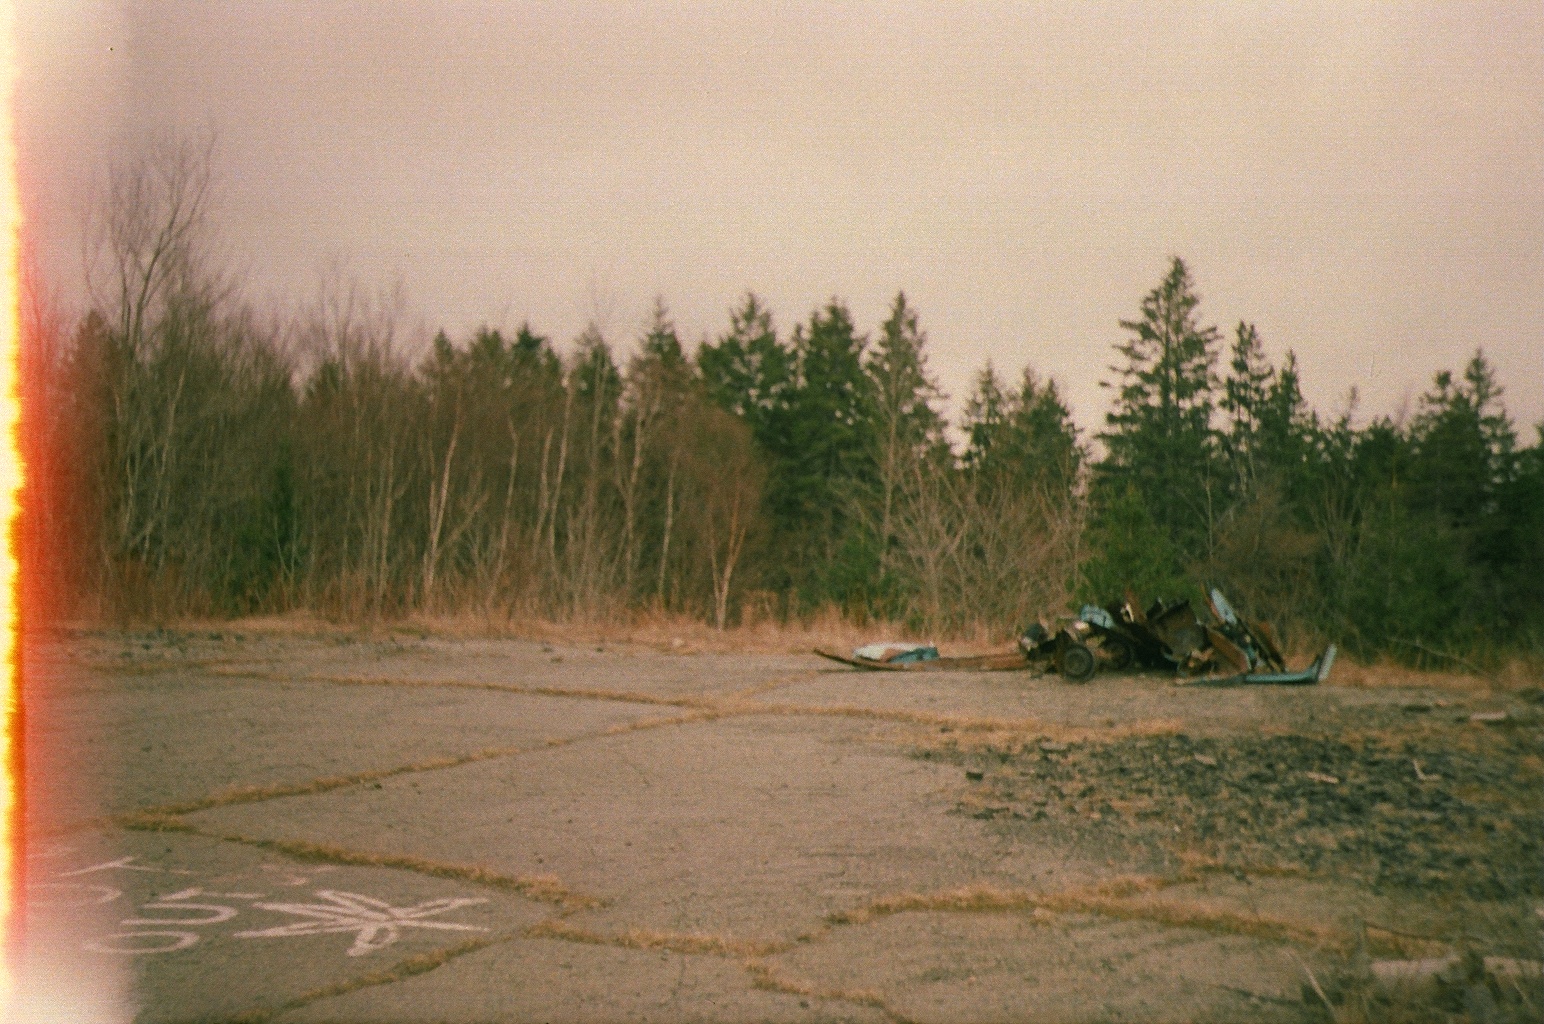 photo of an old road and a dead car